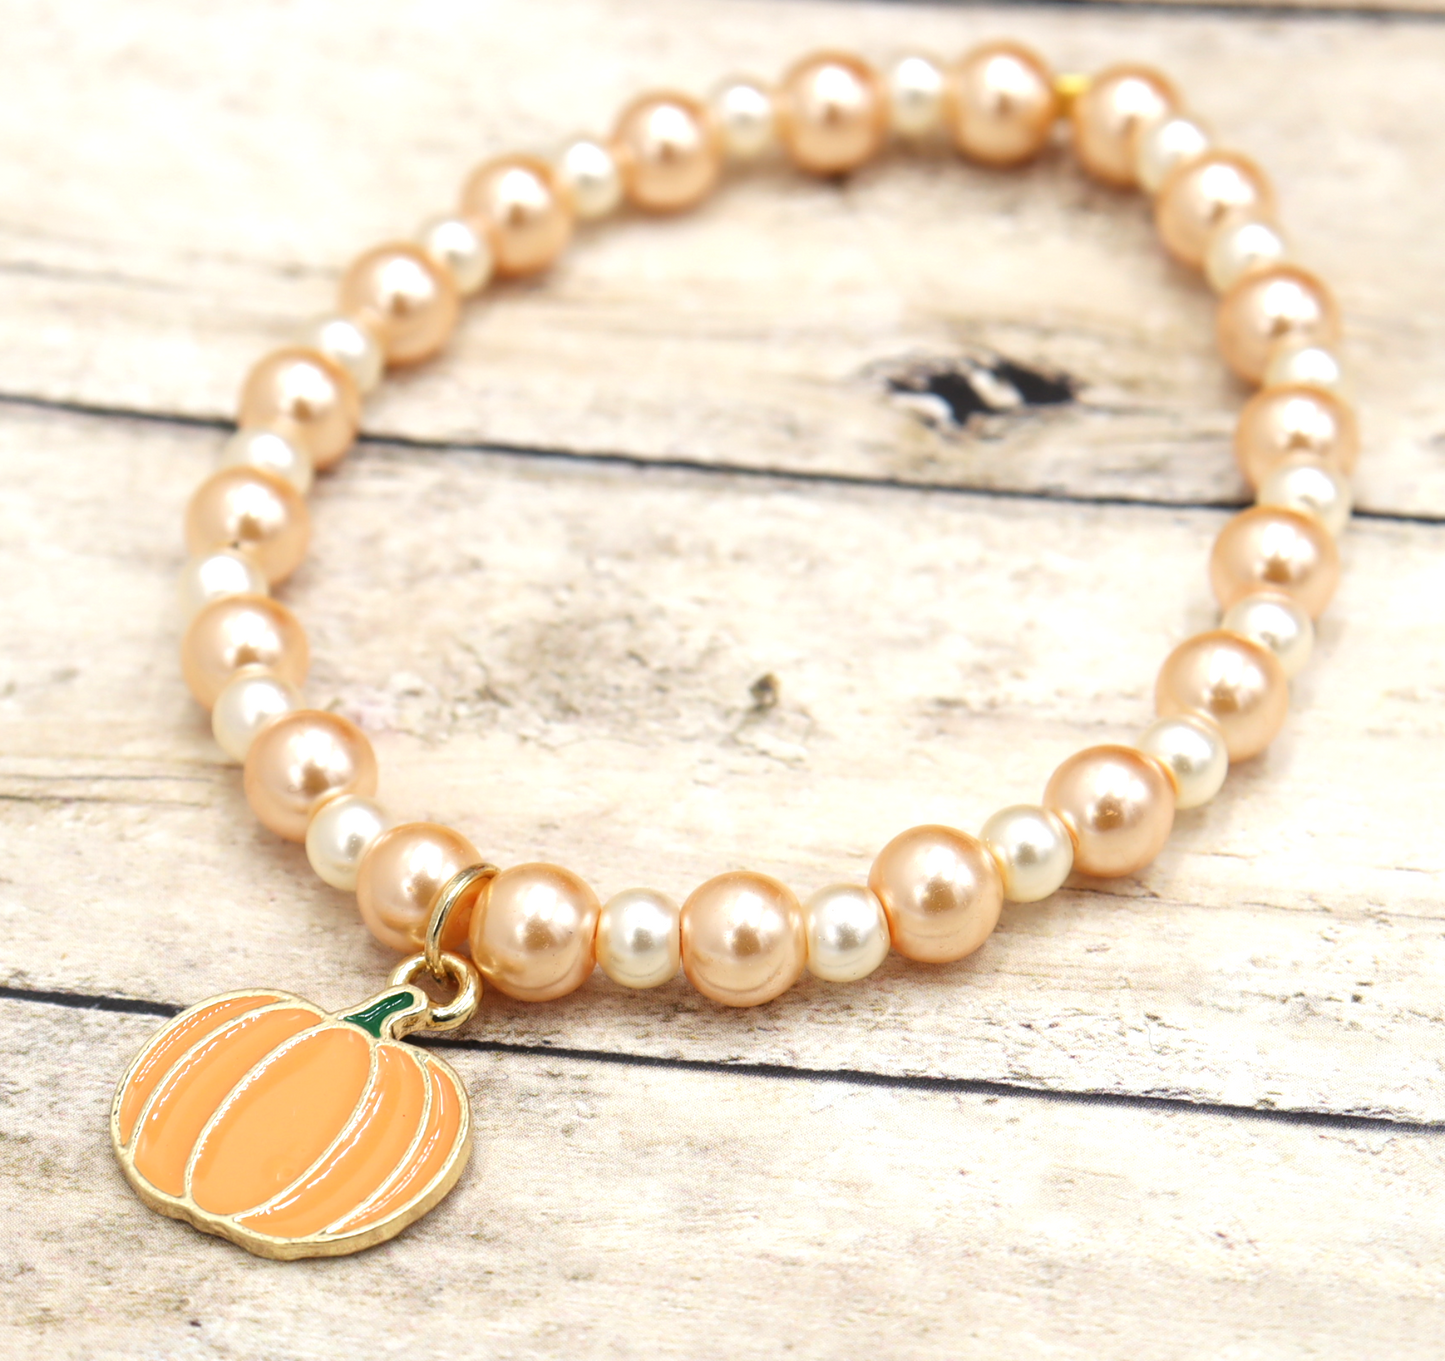 Pastels, Pearls and Pumpkin Bracelet - Girly and Classic Halloween Reimagined Bracelet by Monkey's Mojo